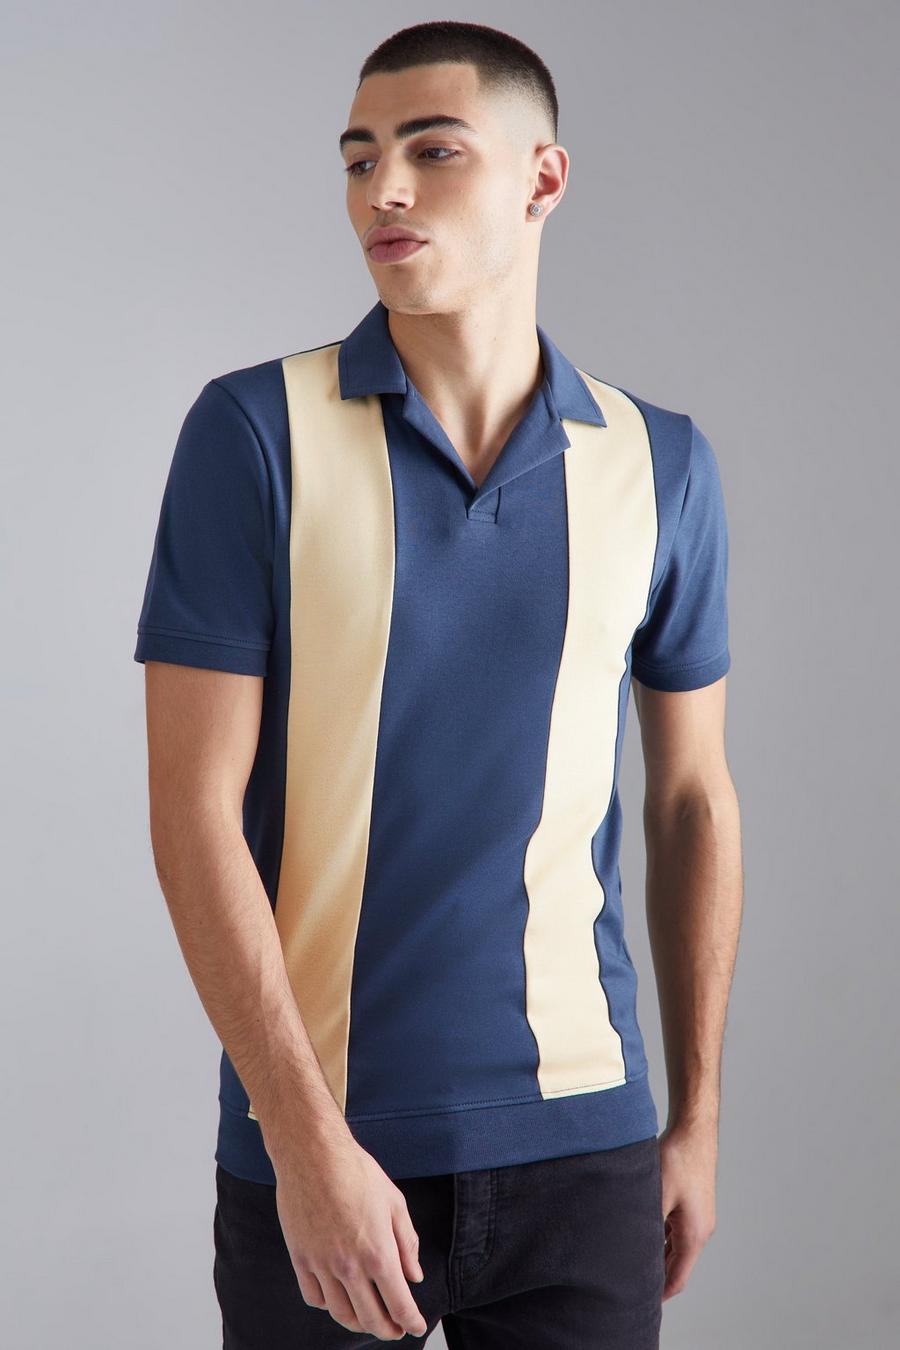 Muscle-Fit Colorblock Poloshirt, Navy